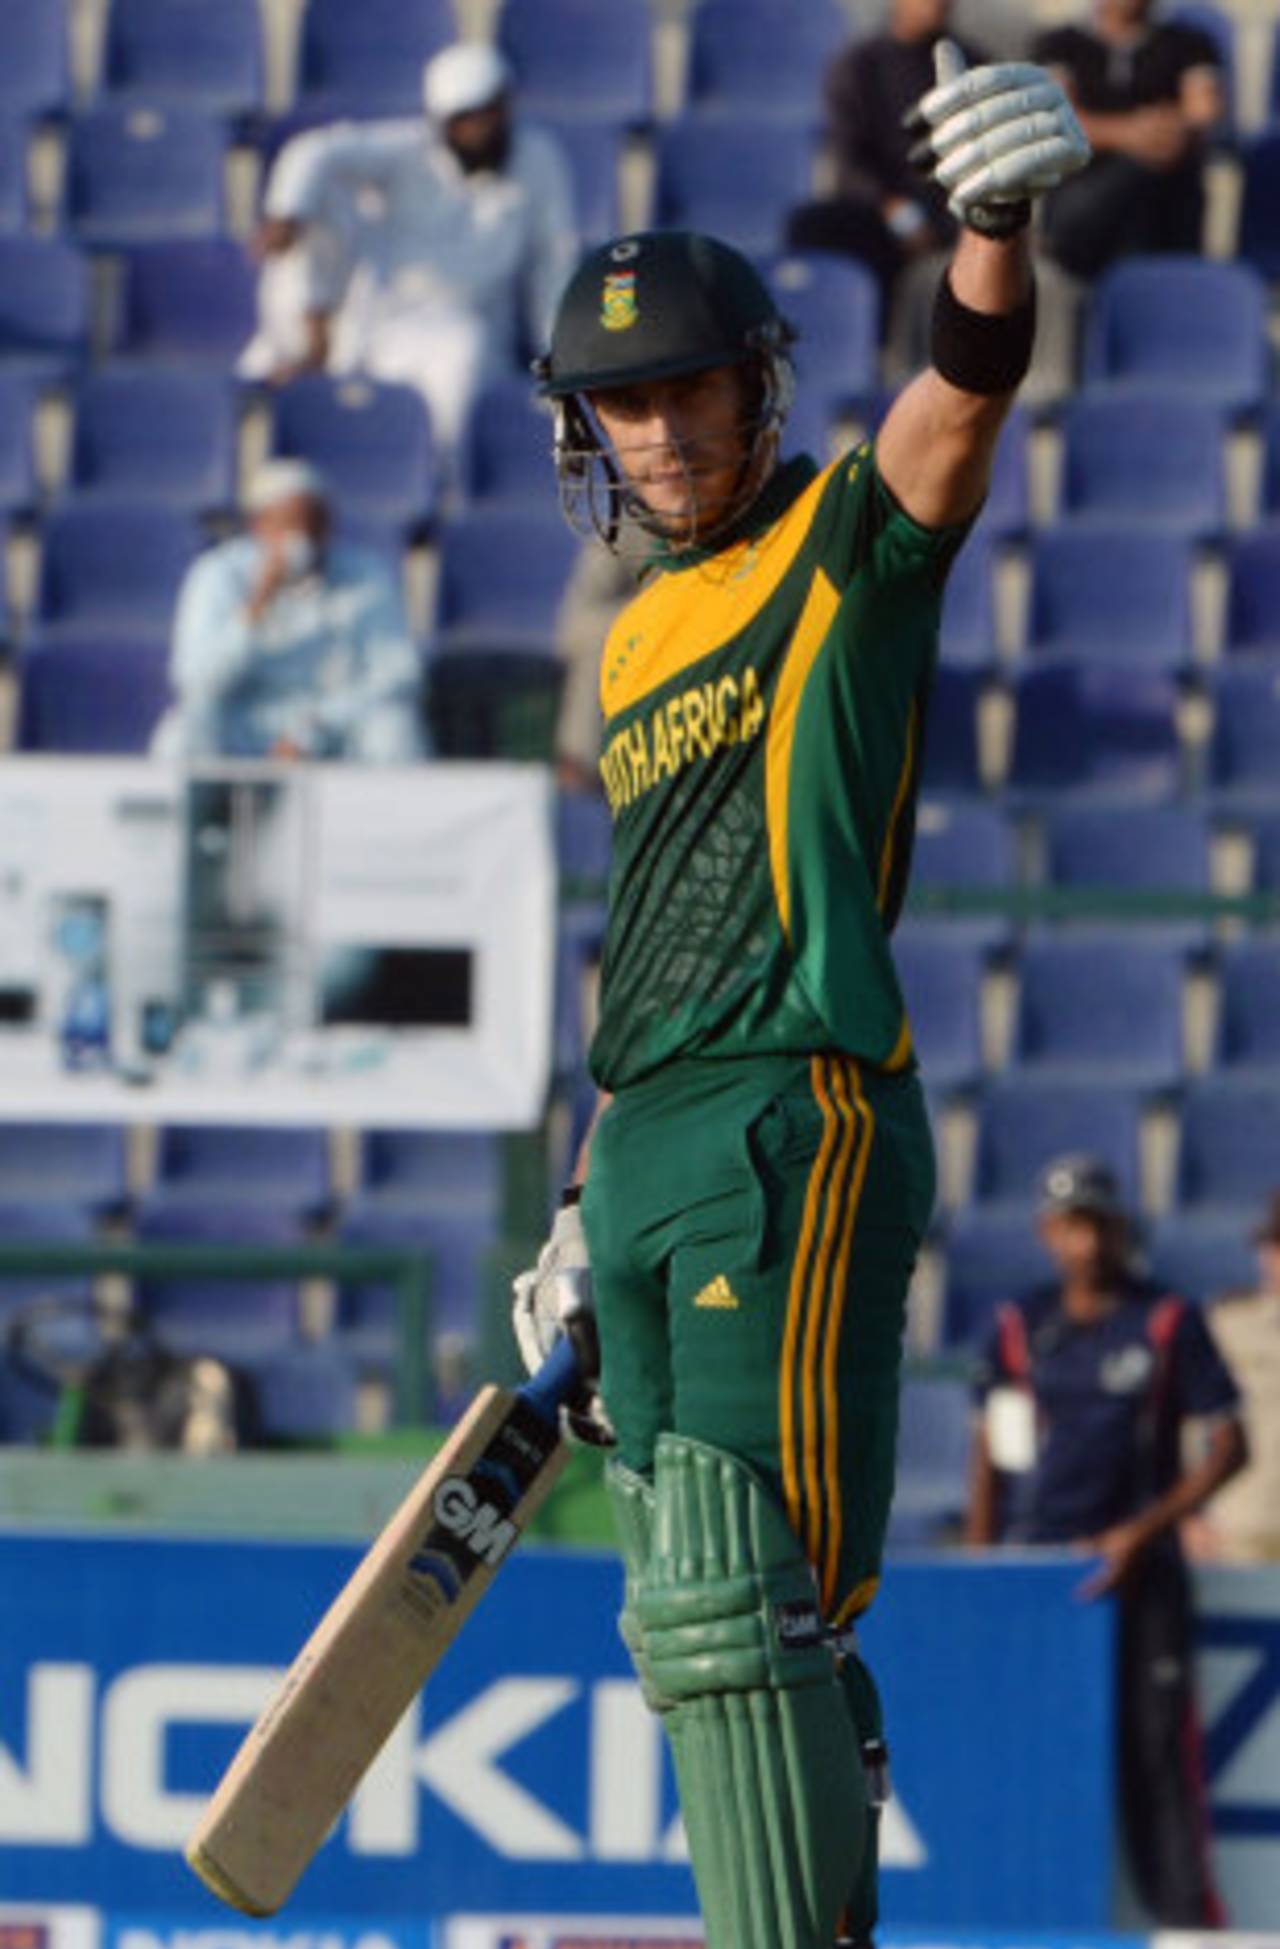 Faf du Plessis anchored the innings with a half-century, Pakistan v South Africa, 3rd ODI, Abu Dhabi, November 6, 2013